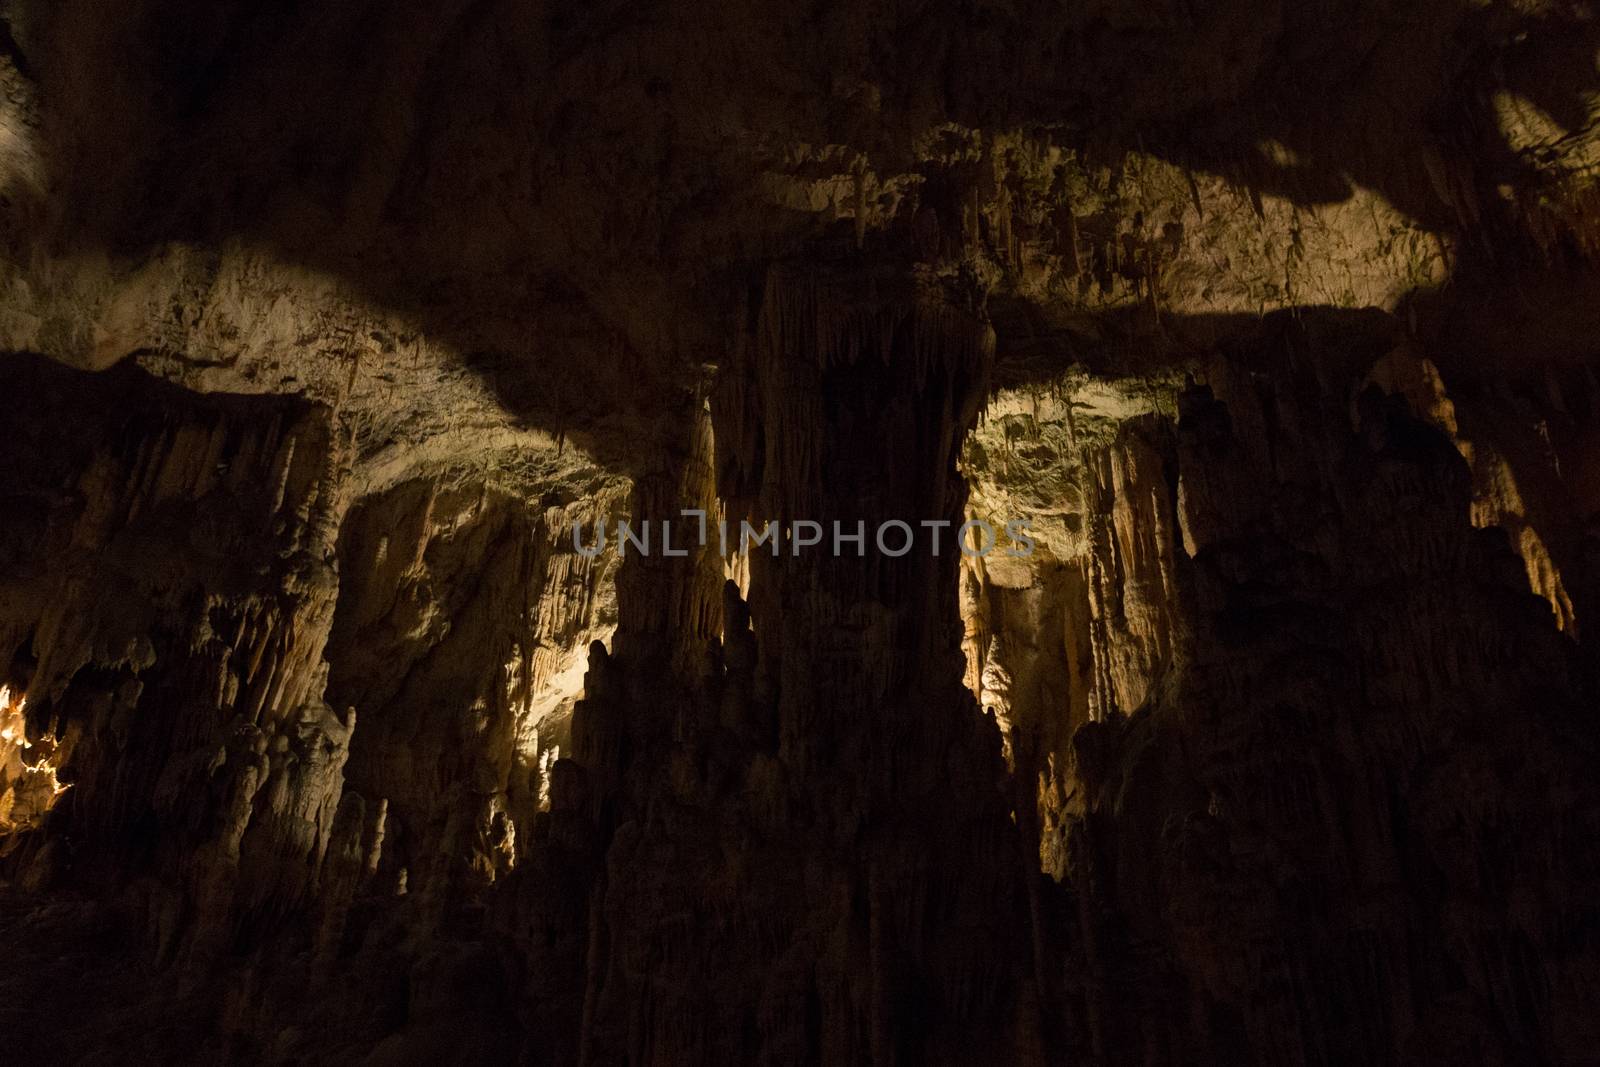 Postojna cave, Slovenia. Formations inside cave with stalactites and stalagmites by SeuMelhorClick